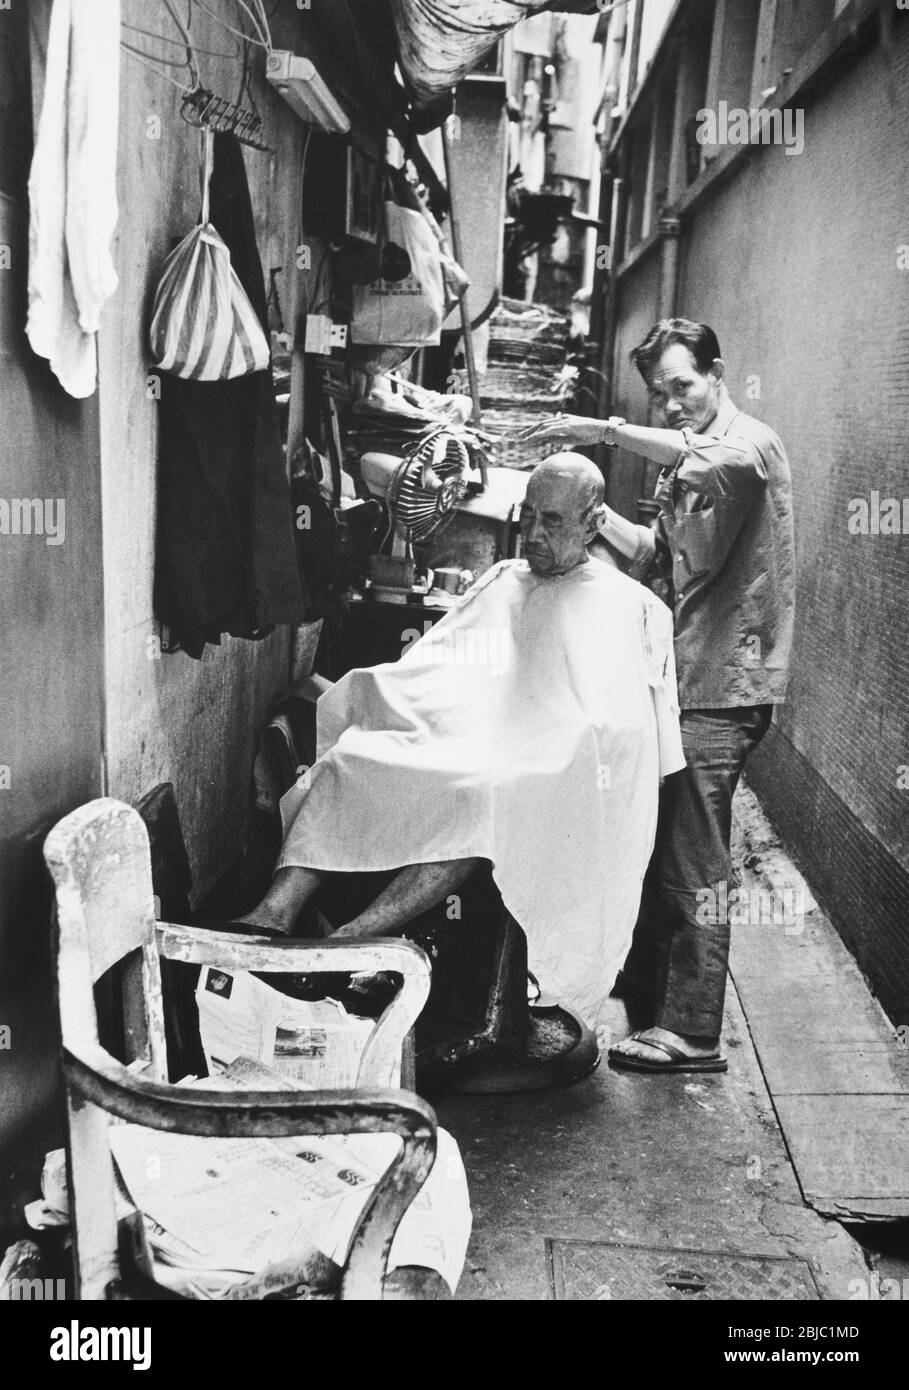 Hong Kong October 1986 Men’s hairdresser in Des Voeux Road, in the Central district of Hong Kong. The picture is is part of a collection of photographs taken in Hong Kong between September and November, 1986. They represent a snapshot of Daily Life in the Crown Colony eleven years before sovereignty was transferred back to mainland China. Photograph by Howard Walker / Alamy. Stock Photo